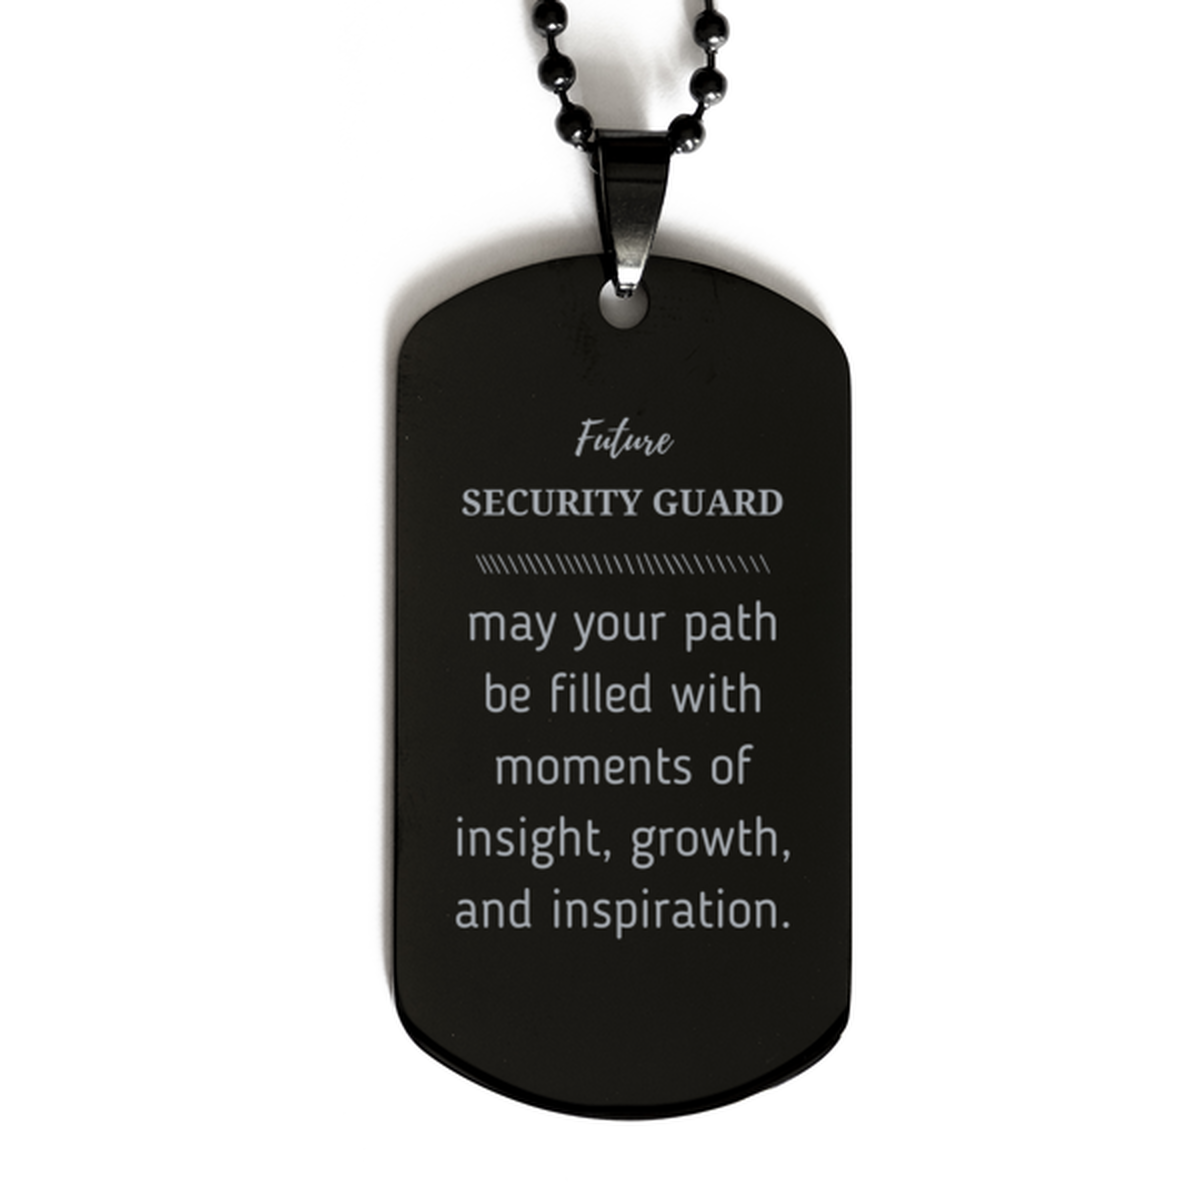 Future Security Guard Gifts, May your path be filled with moments of insight, Graduation Gifts for New Security Guard, Christmas Unique Black Dog Tag For Men, Women, Friends